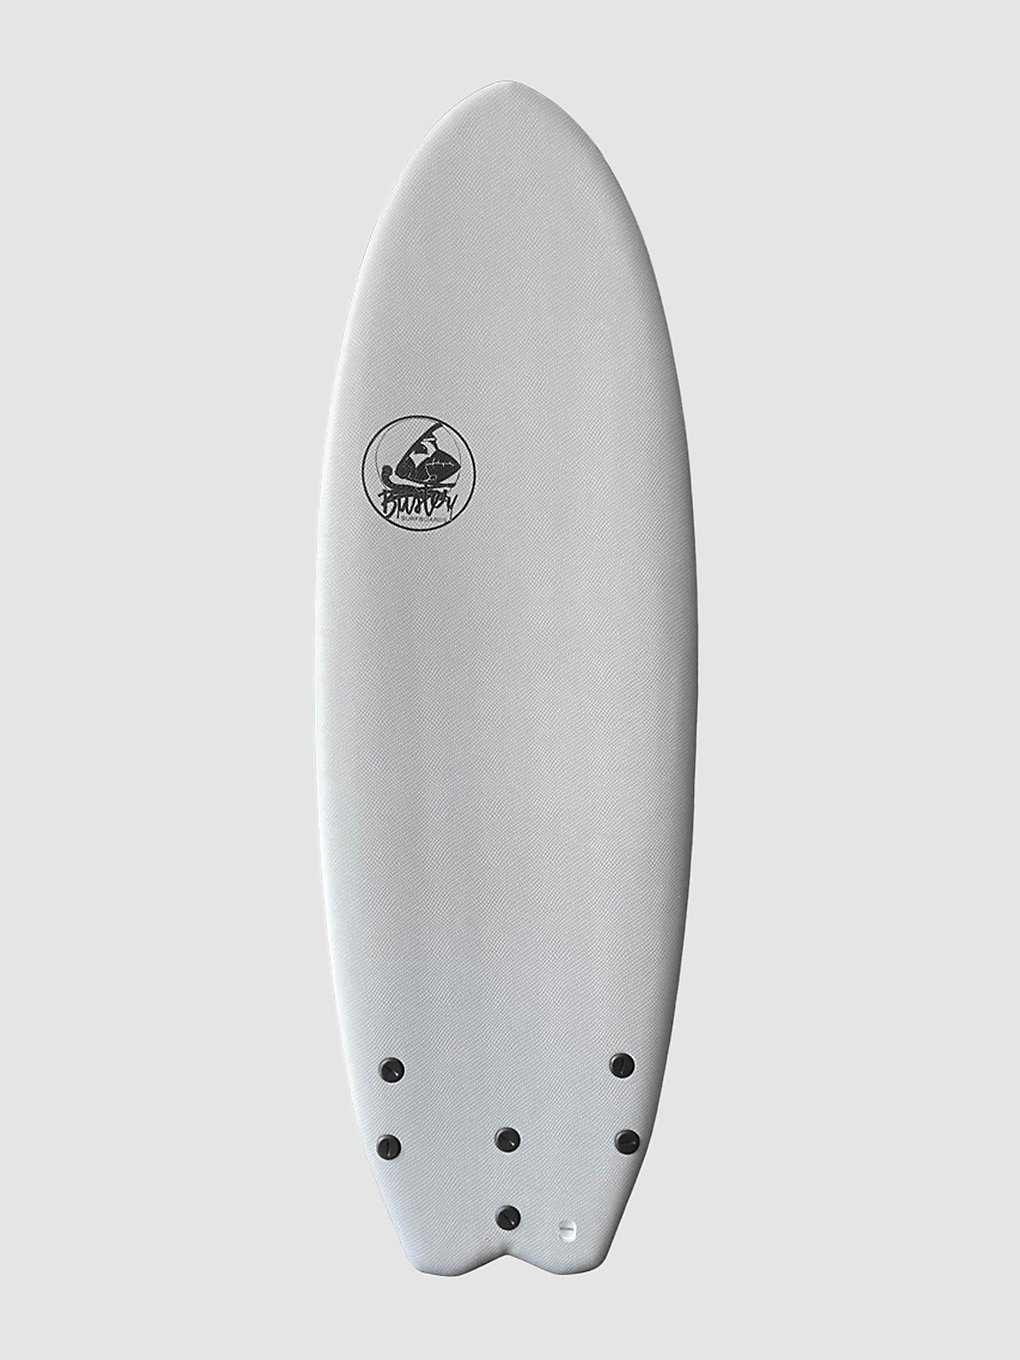 Buster 5'0 Space Twin Puffin Riversurfboard grijs